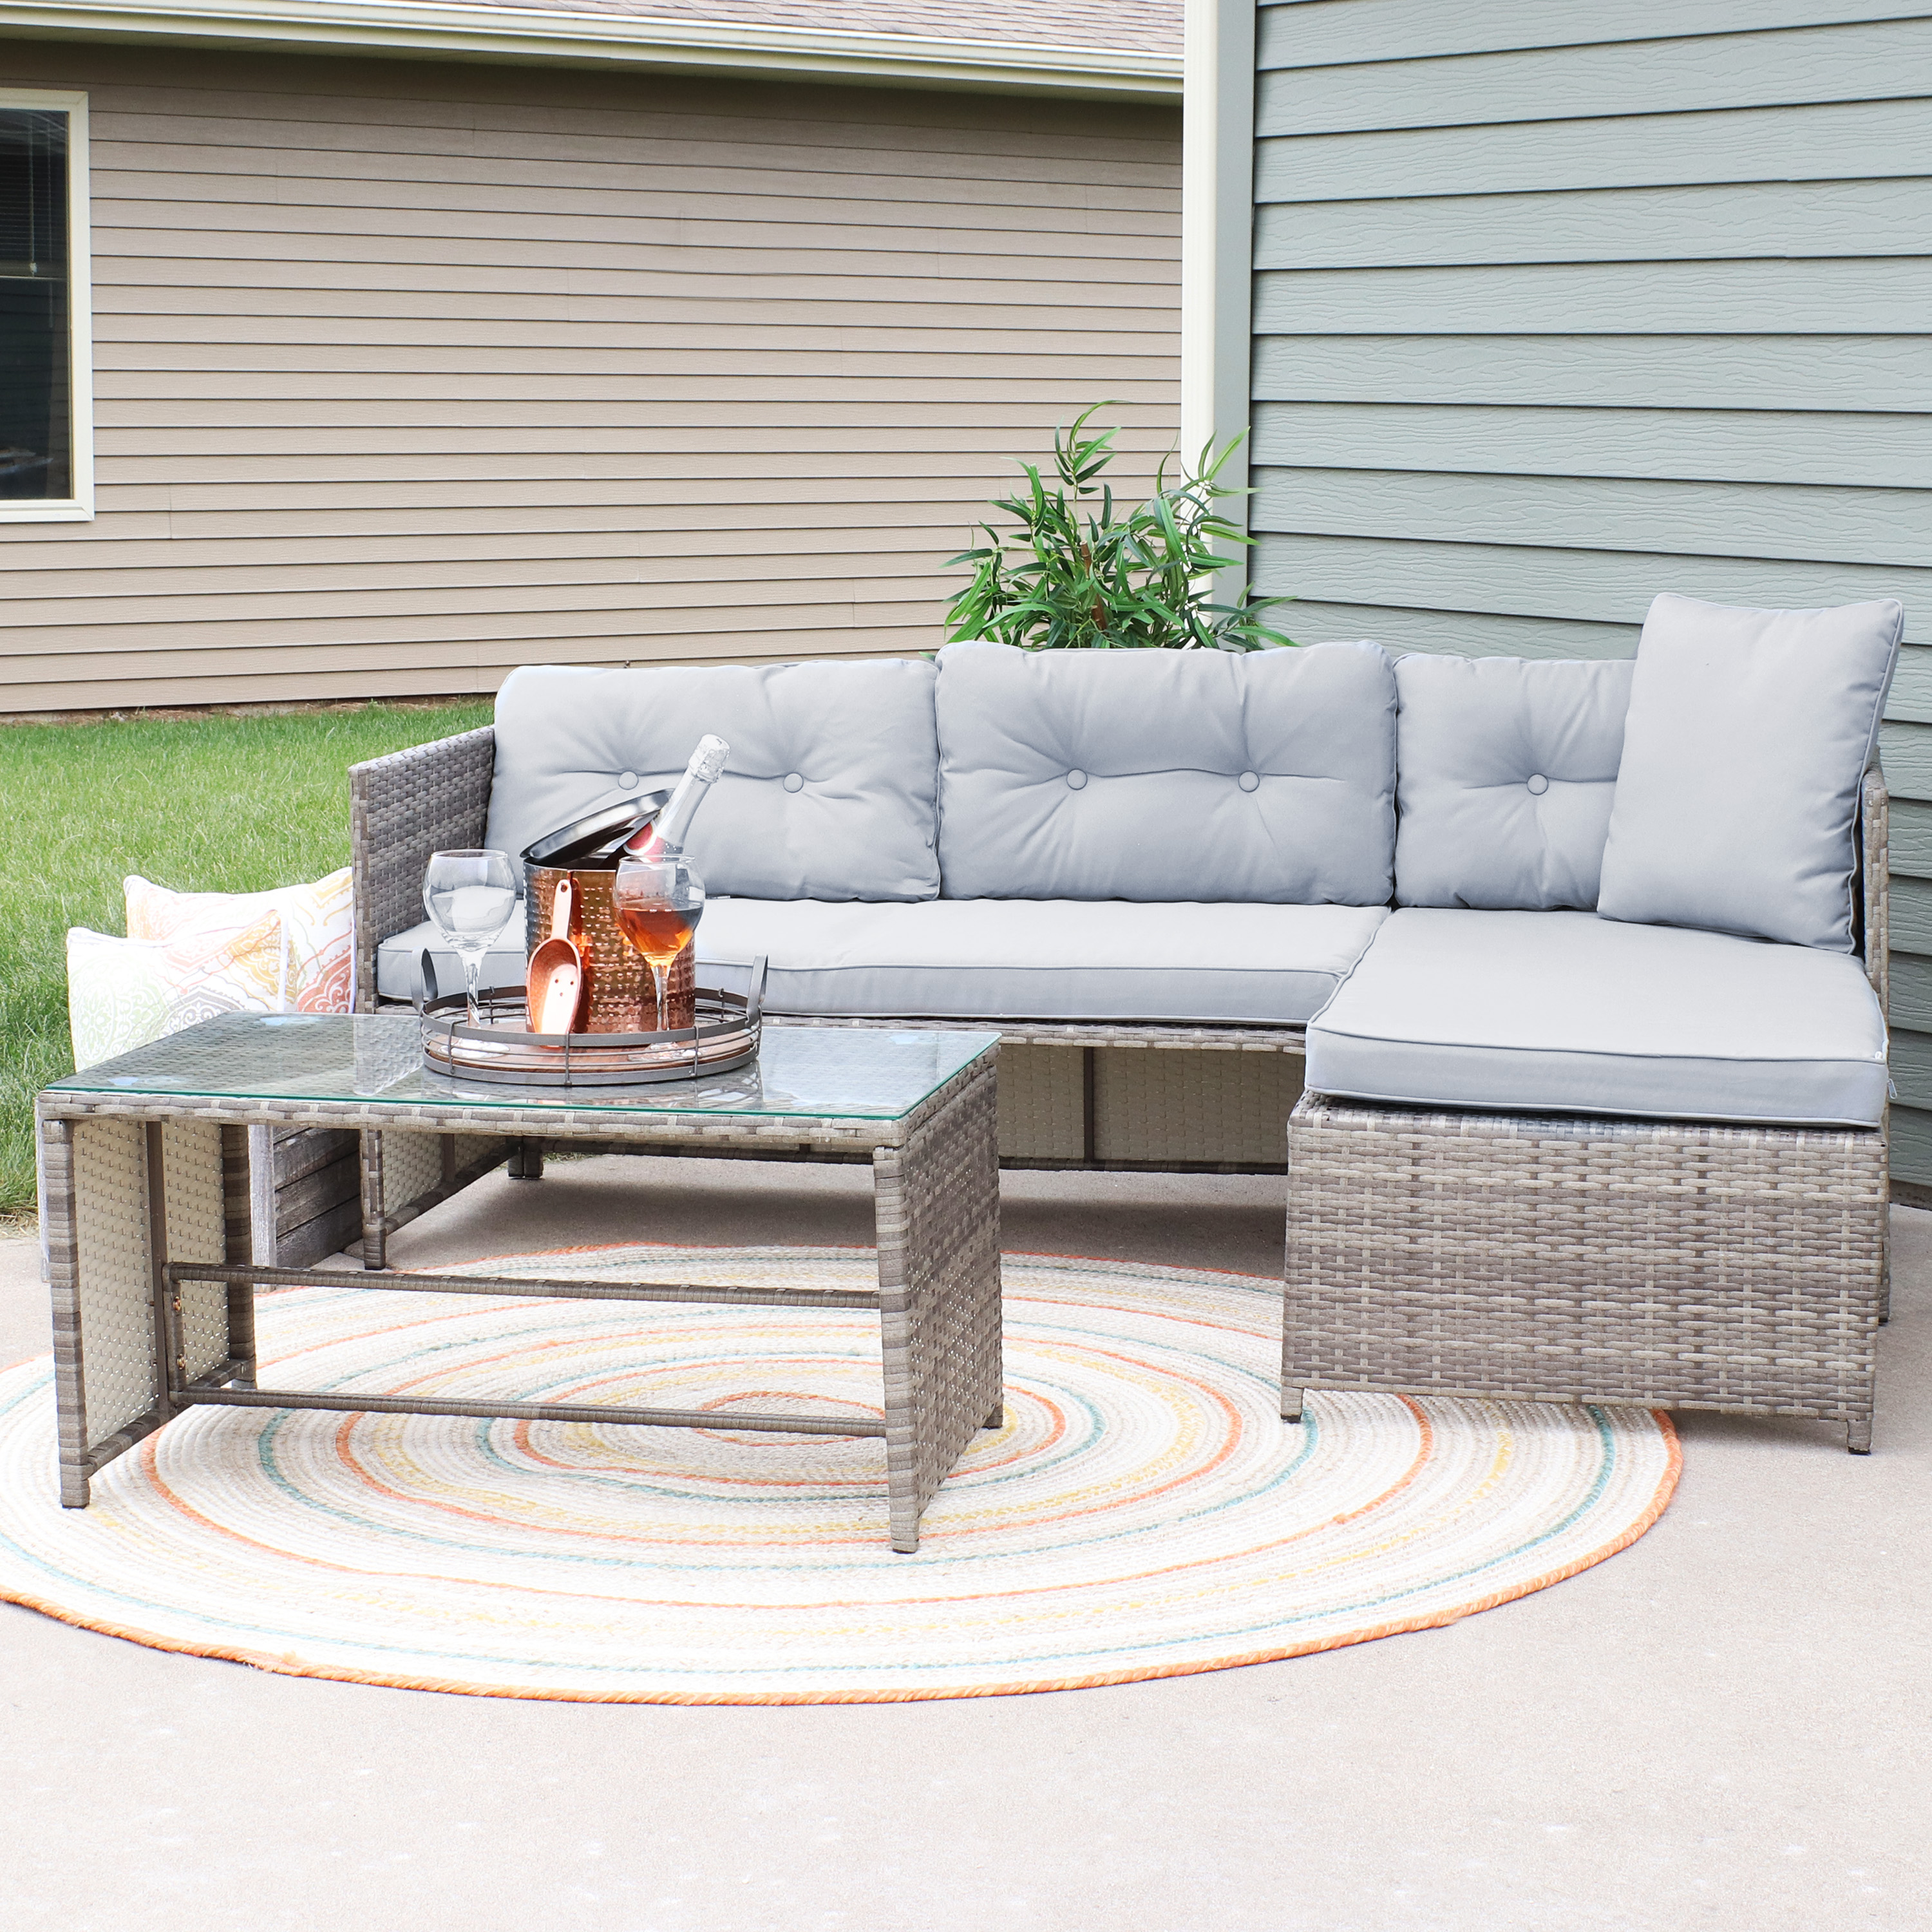 Sunnydaze Outdoor Longford Patio Sectional Sofa Conversation Set with Cushions and Table - Stone Gray - 3pc - image 2 of 11